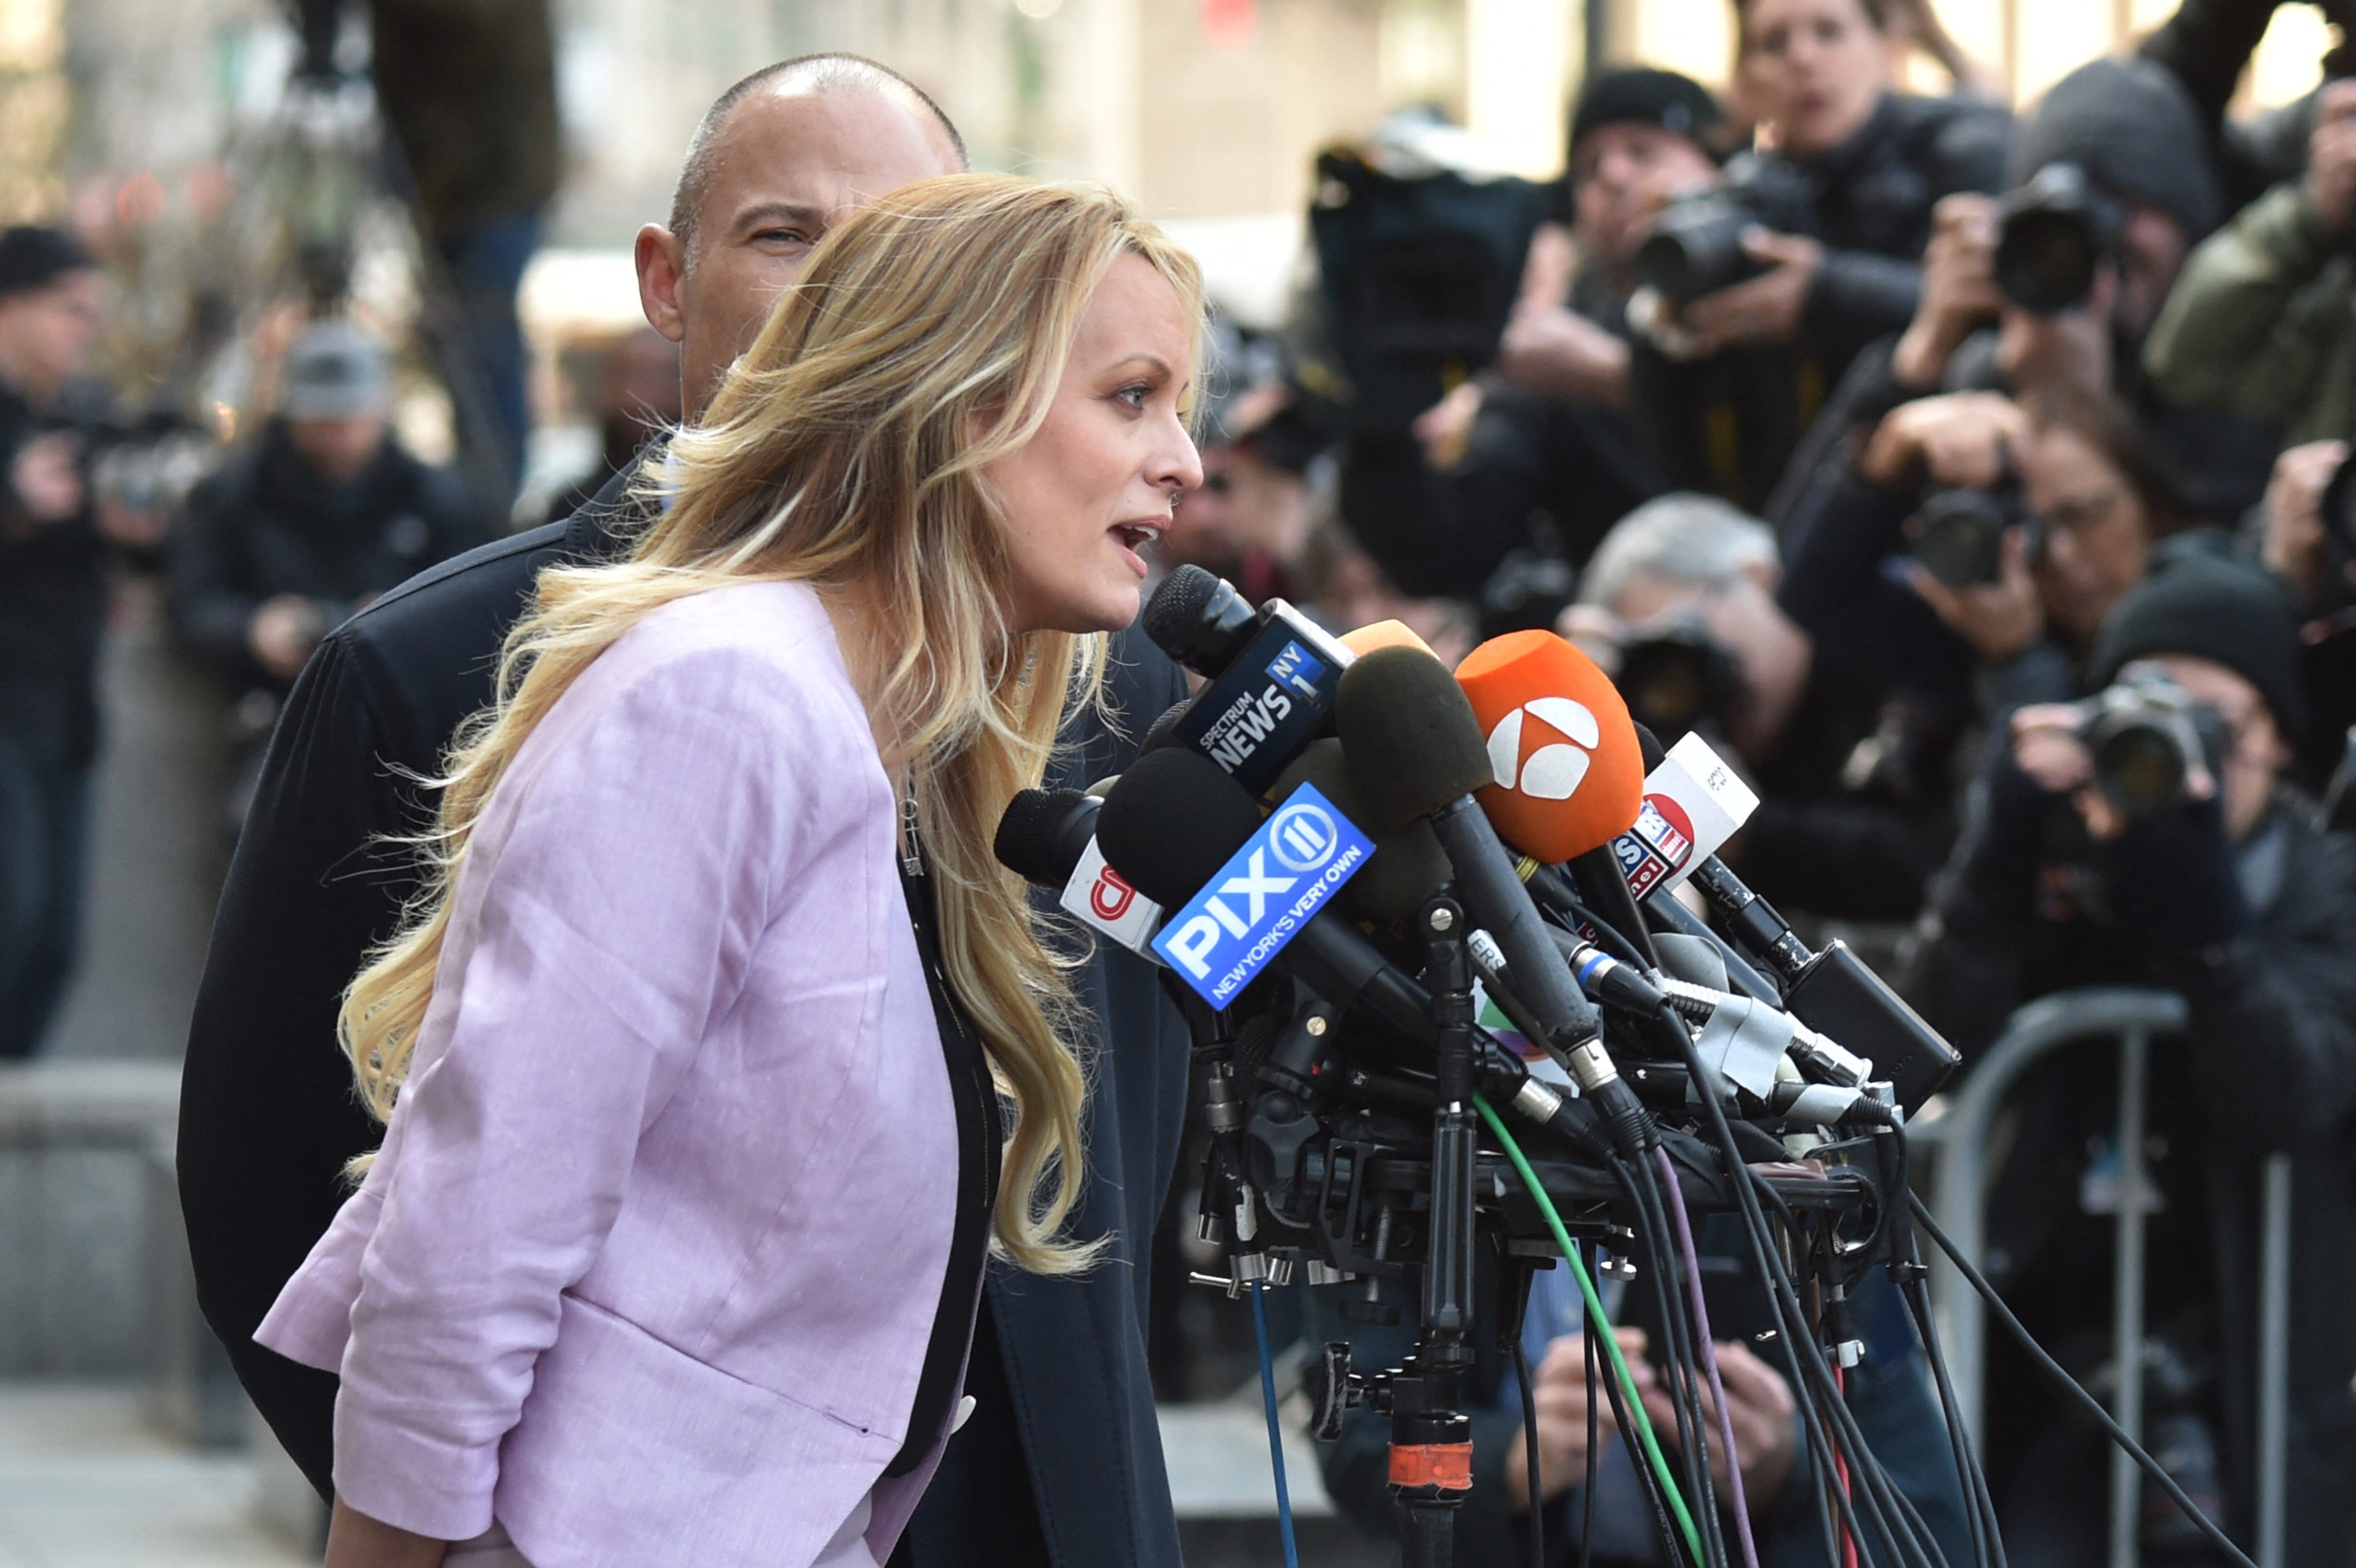 Stormy Daniels, porn actress at center of Trump trial, reacts after historic conviction